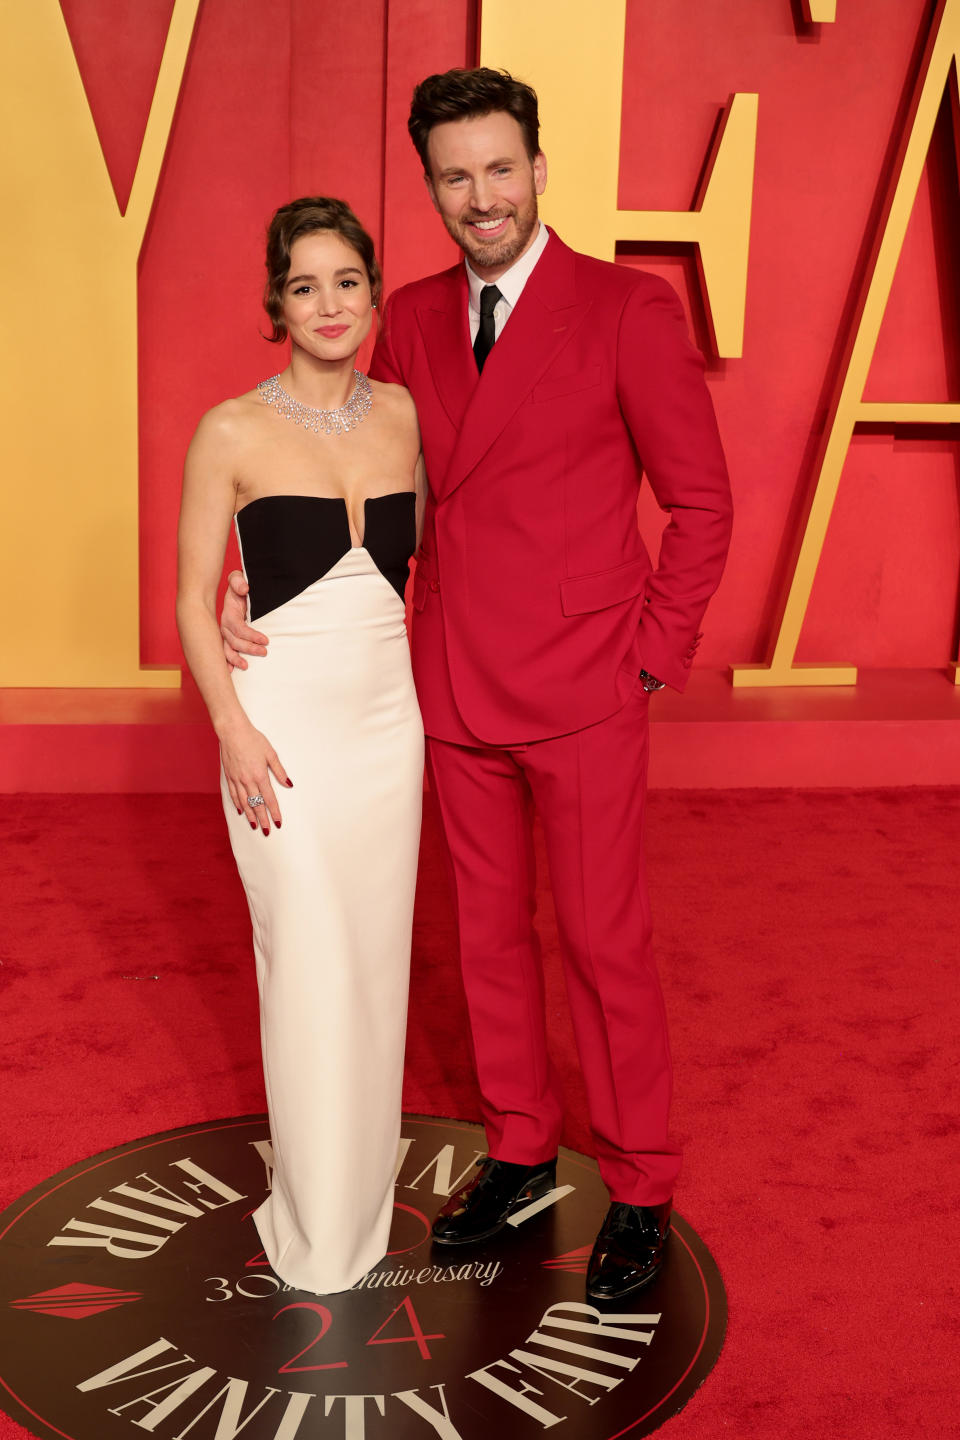 BEVERLY HILLS, CALIFORNIA - MARCH 10: (L-R) Alba Baptista and Chris Evans attend the 2024 Vanity Fair Oscar Party Hosted By Radhika Jones at Wallis Annenberg Center for the Performing Arts on March 10, 2024 in Beverly Hills, California. (Photo by Kayla Oaddams/FilmMagic)